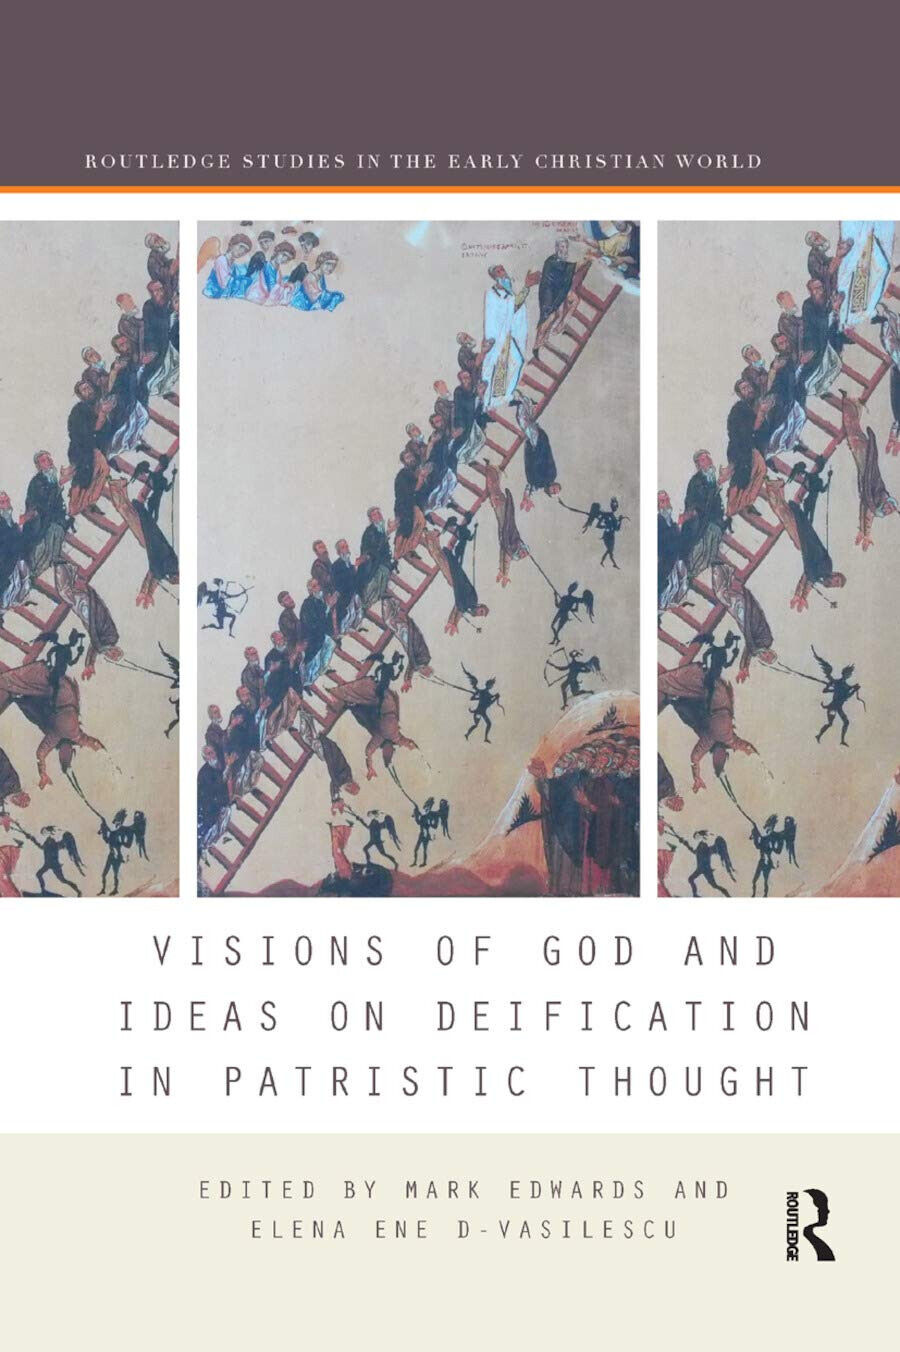 Visions of God and Ideas on Deification in Patristic Thought-Mark Edwards, 2019 libro usato